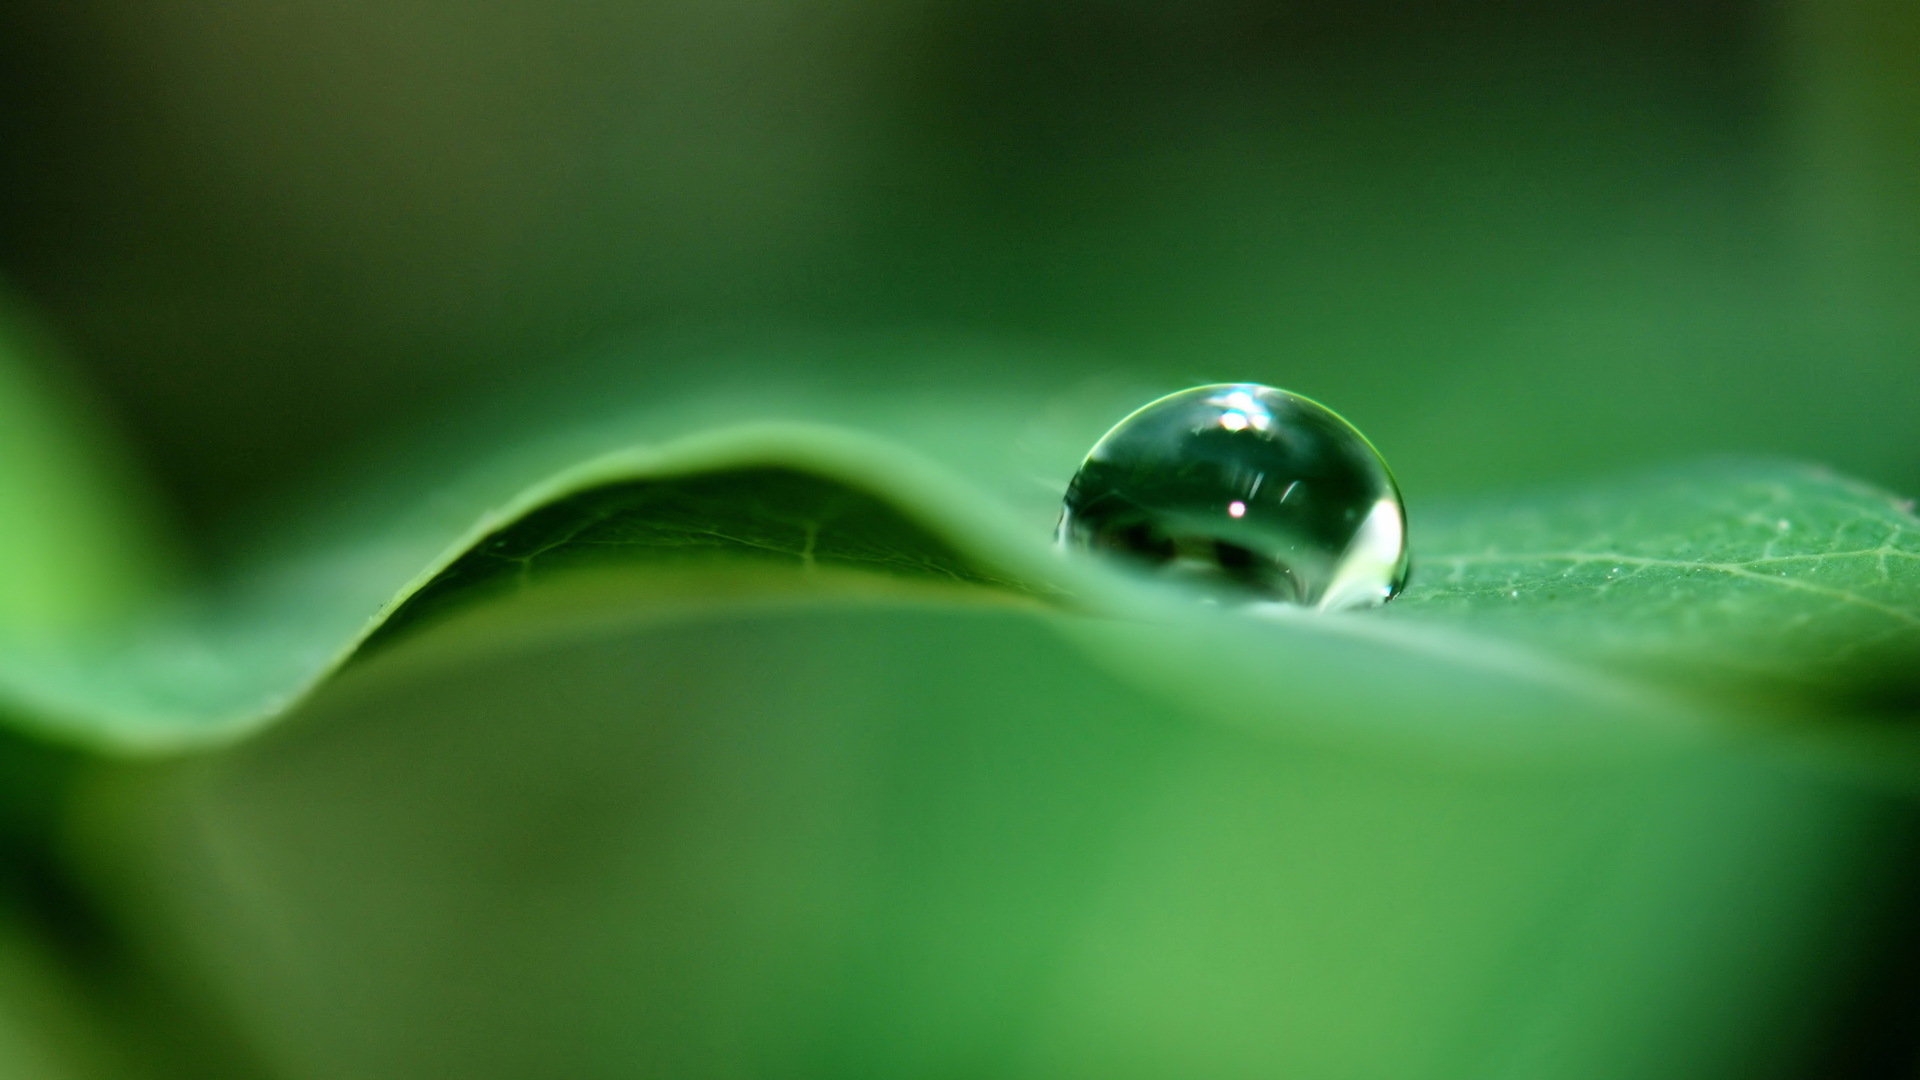 Water Drops HD Wallpapers High Quality Wallpapers 1920x1080